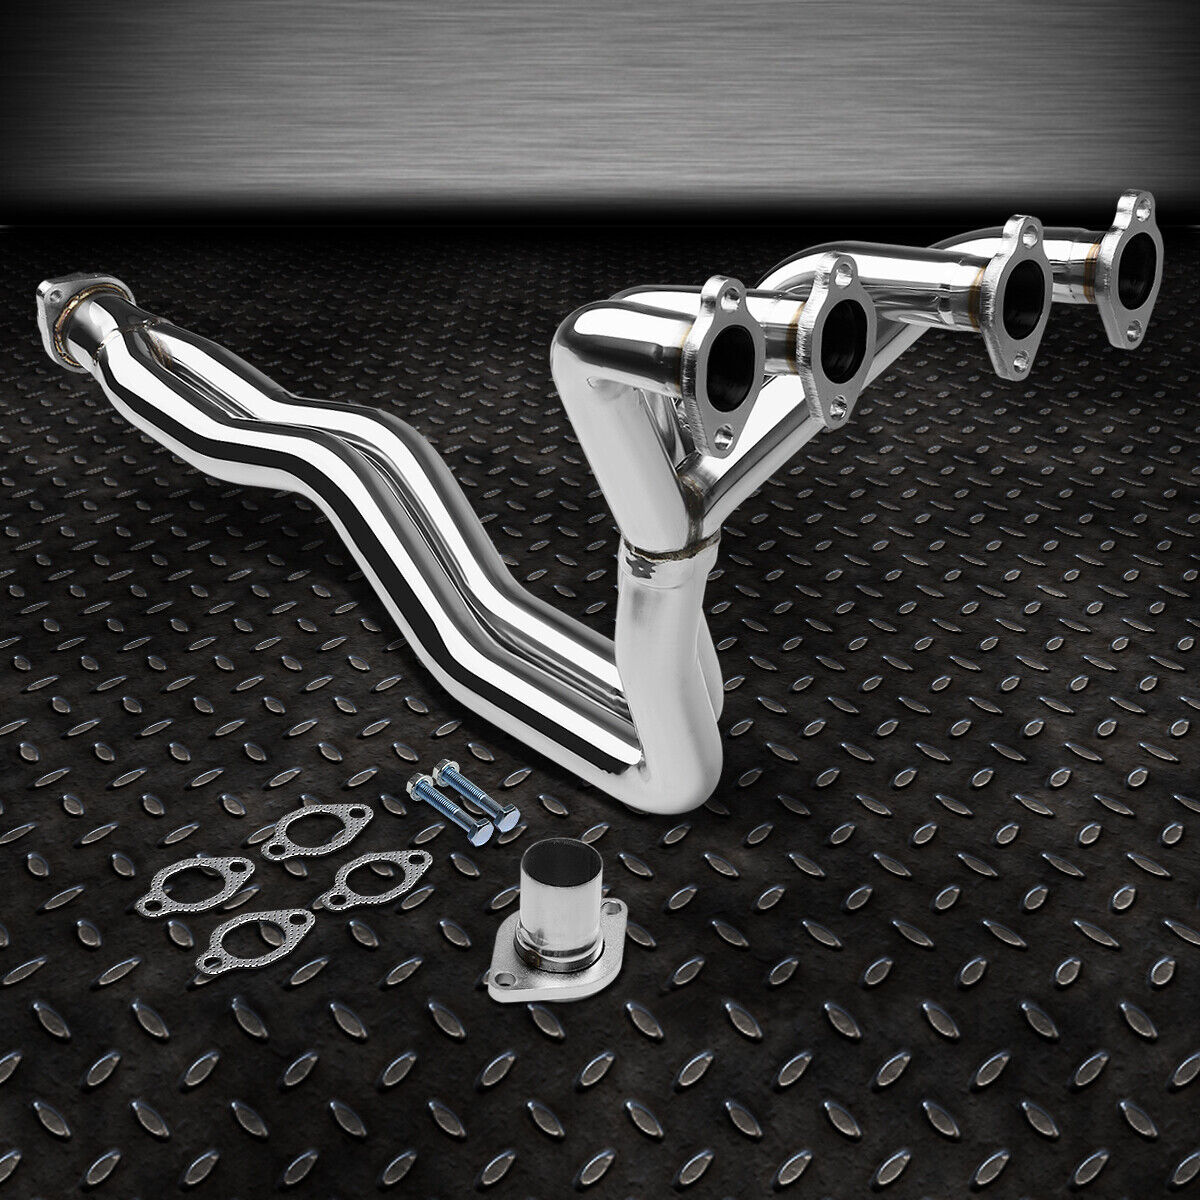 FOR SCIROCCO/CABRIOLET/JETTA/RABBIT/GTI STAINLESS RACING HEADER MANIFOLD/EXHAUST